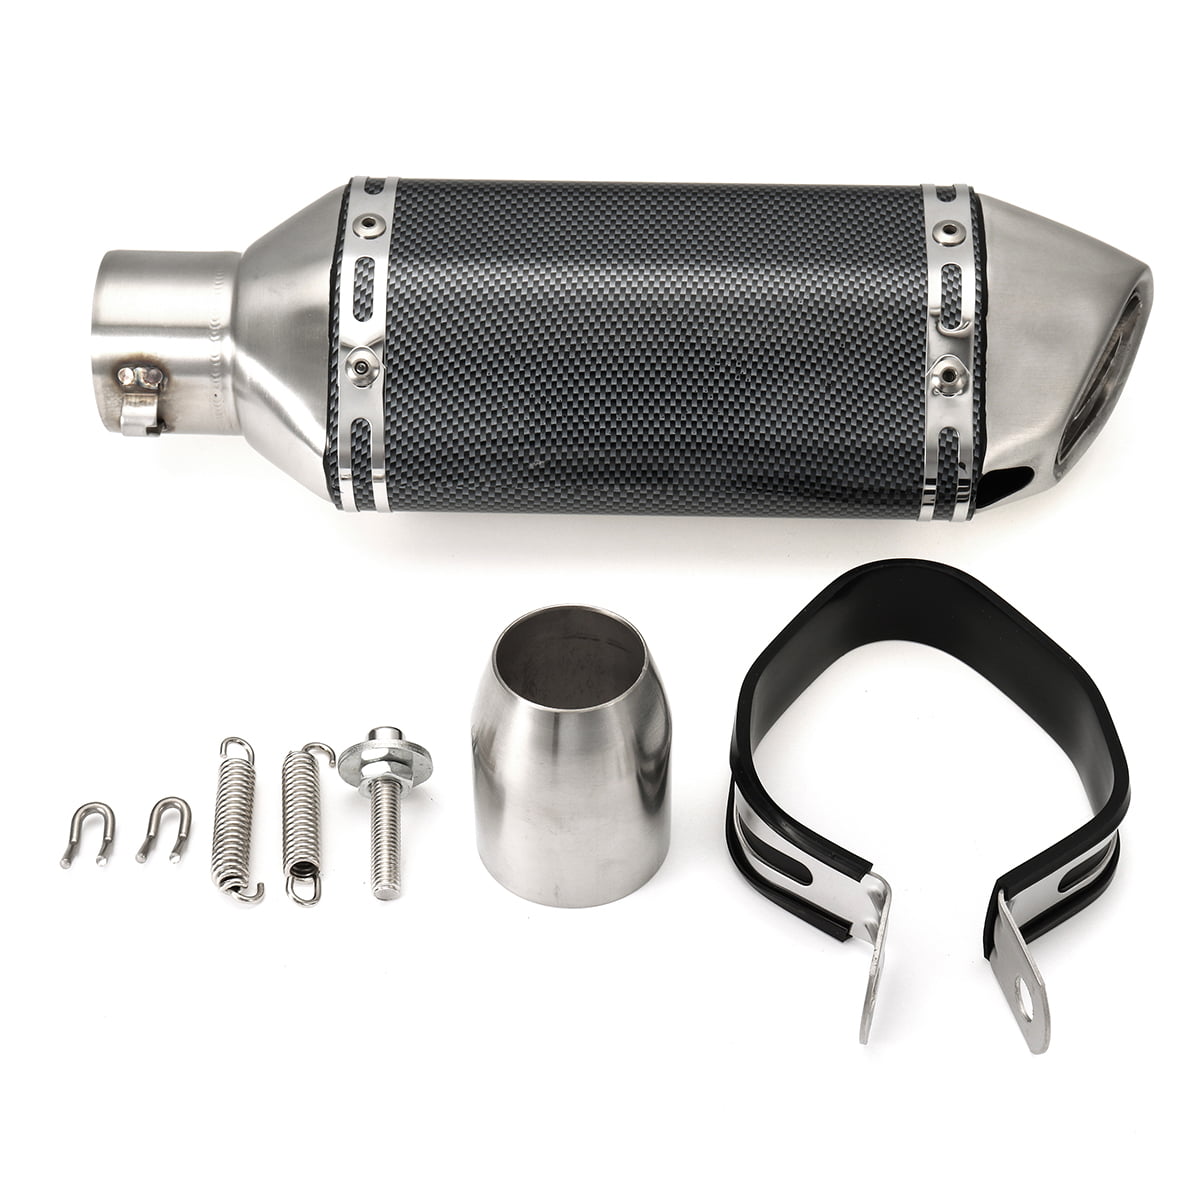 Details about   38-51mm Motorcycle Short Exhaust Muffler Pipe W/ Removable Silencer Universal